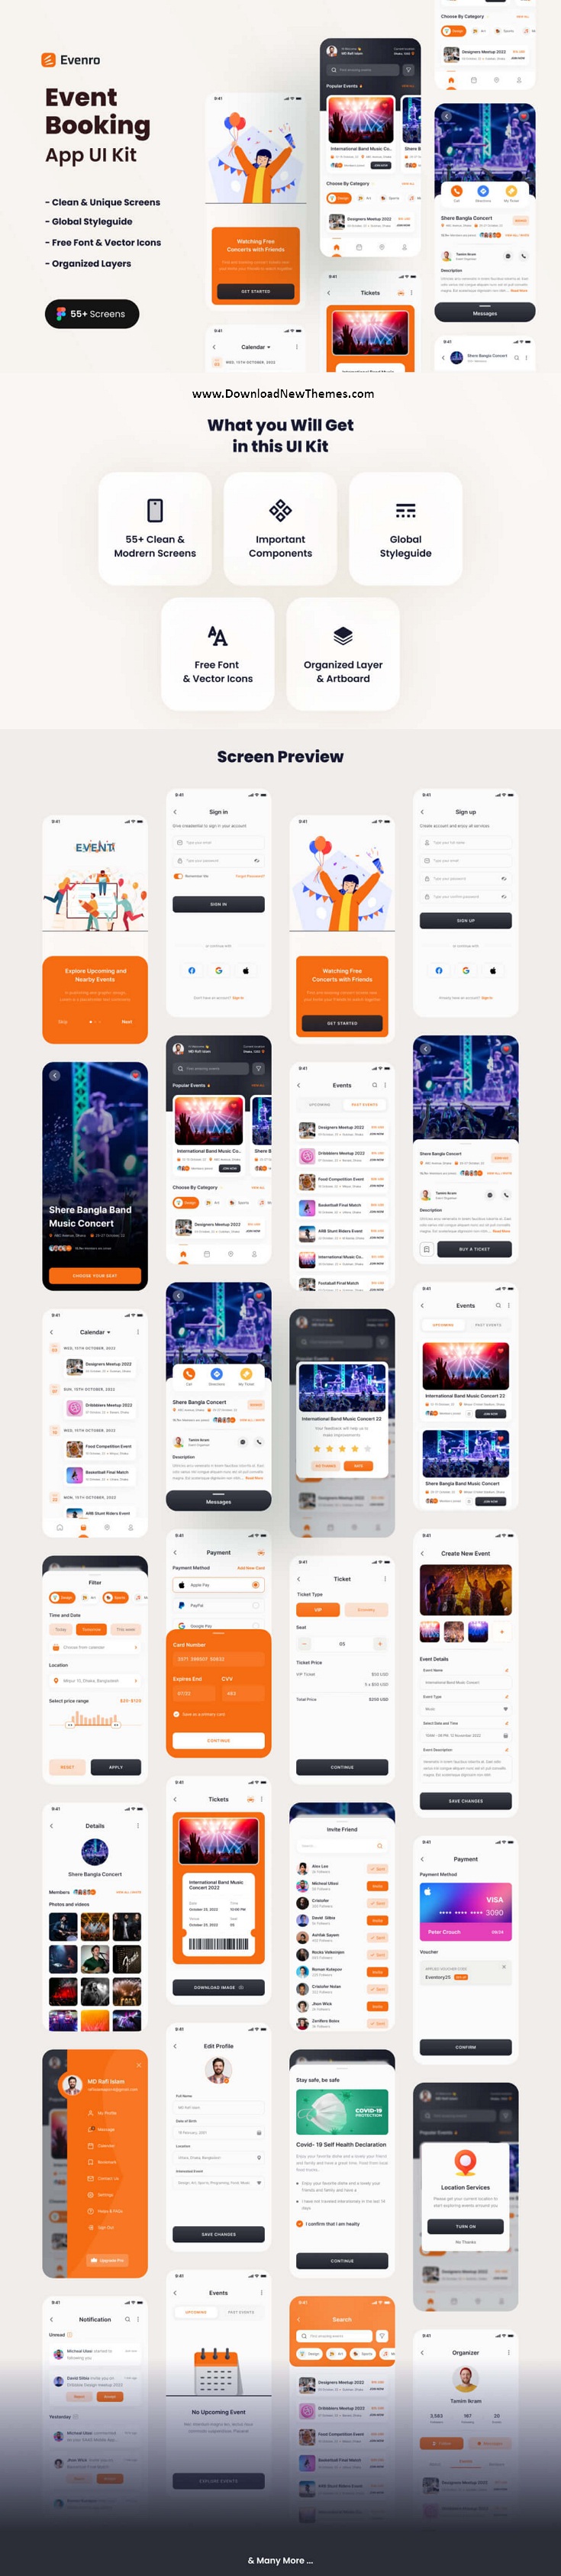 Evenro - Event Booking App Figma Template Review